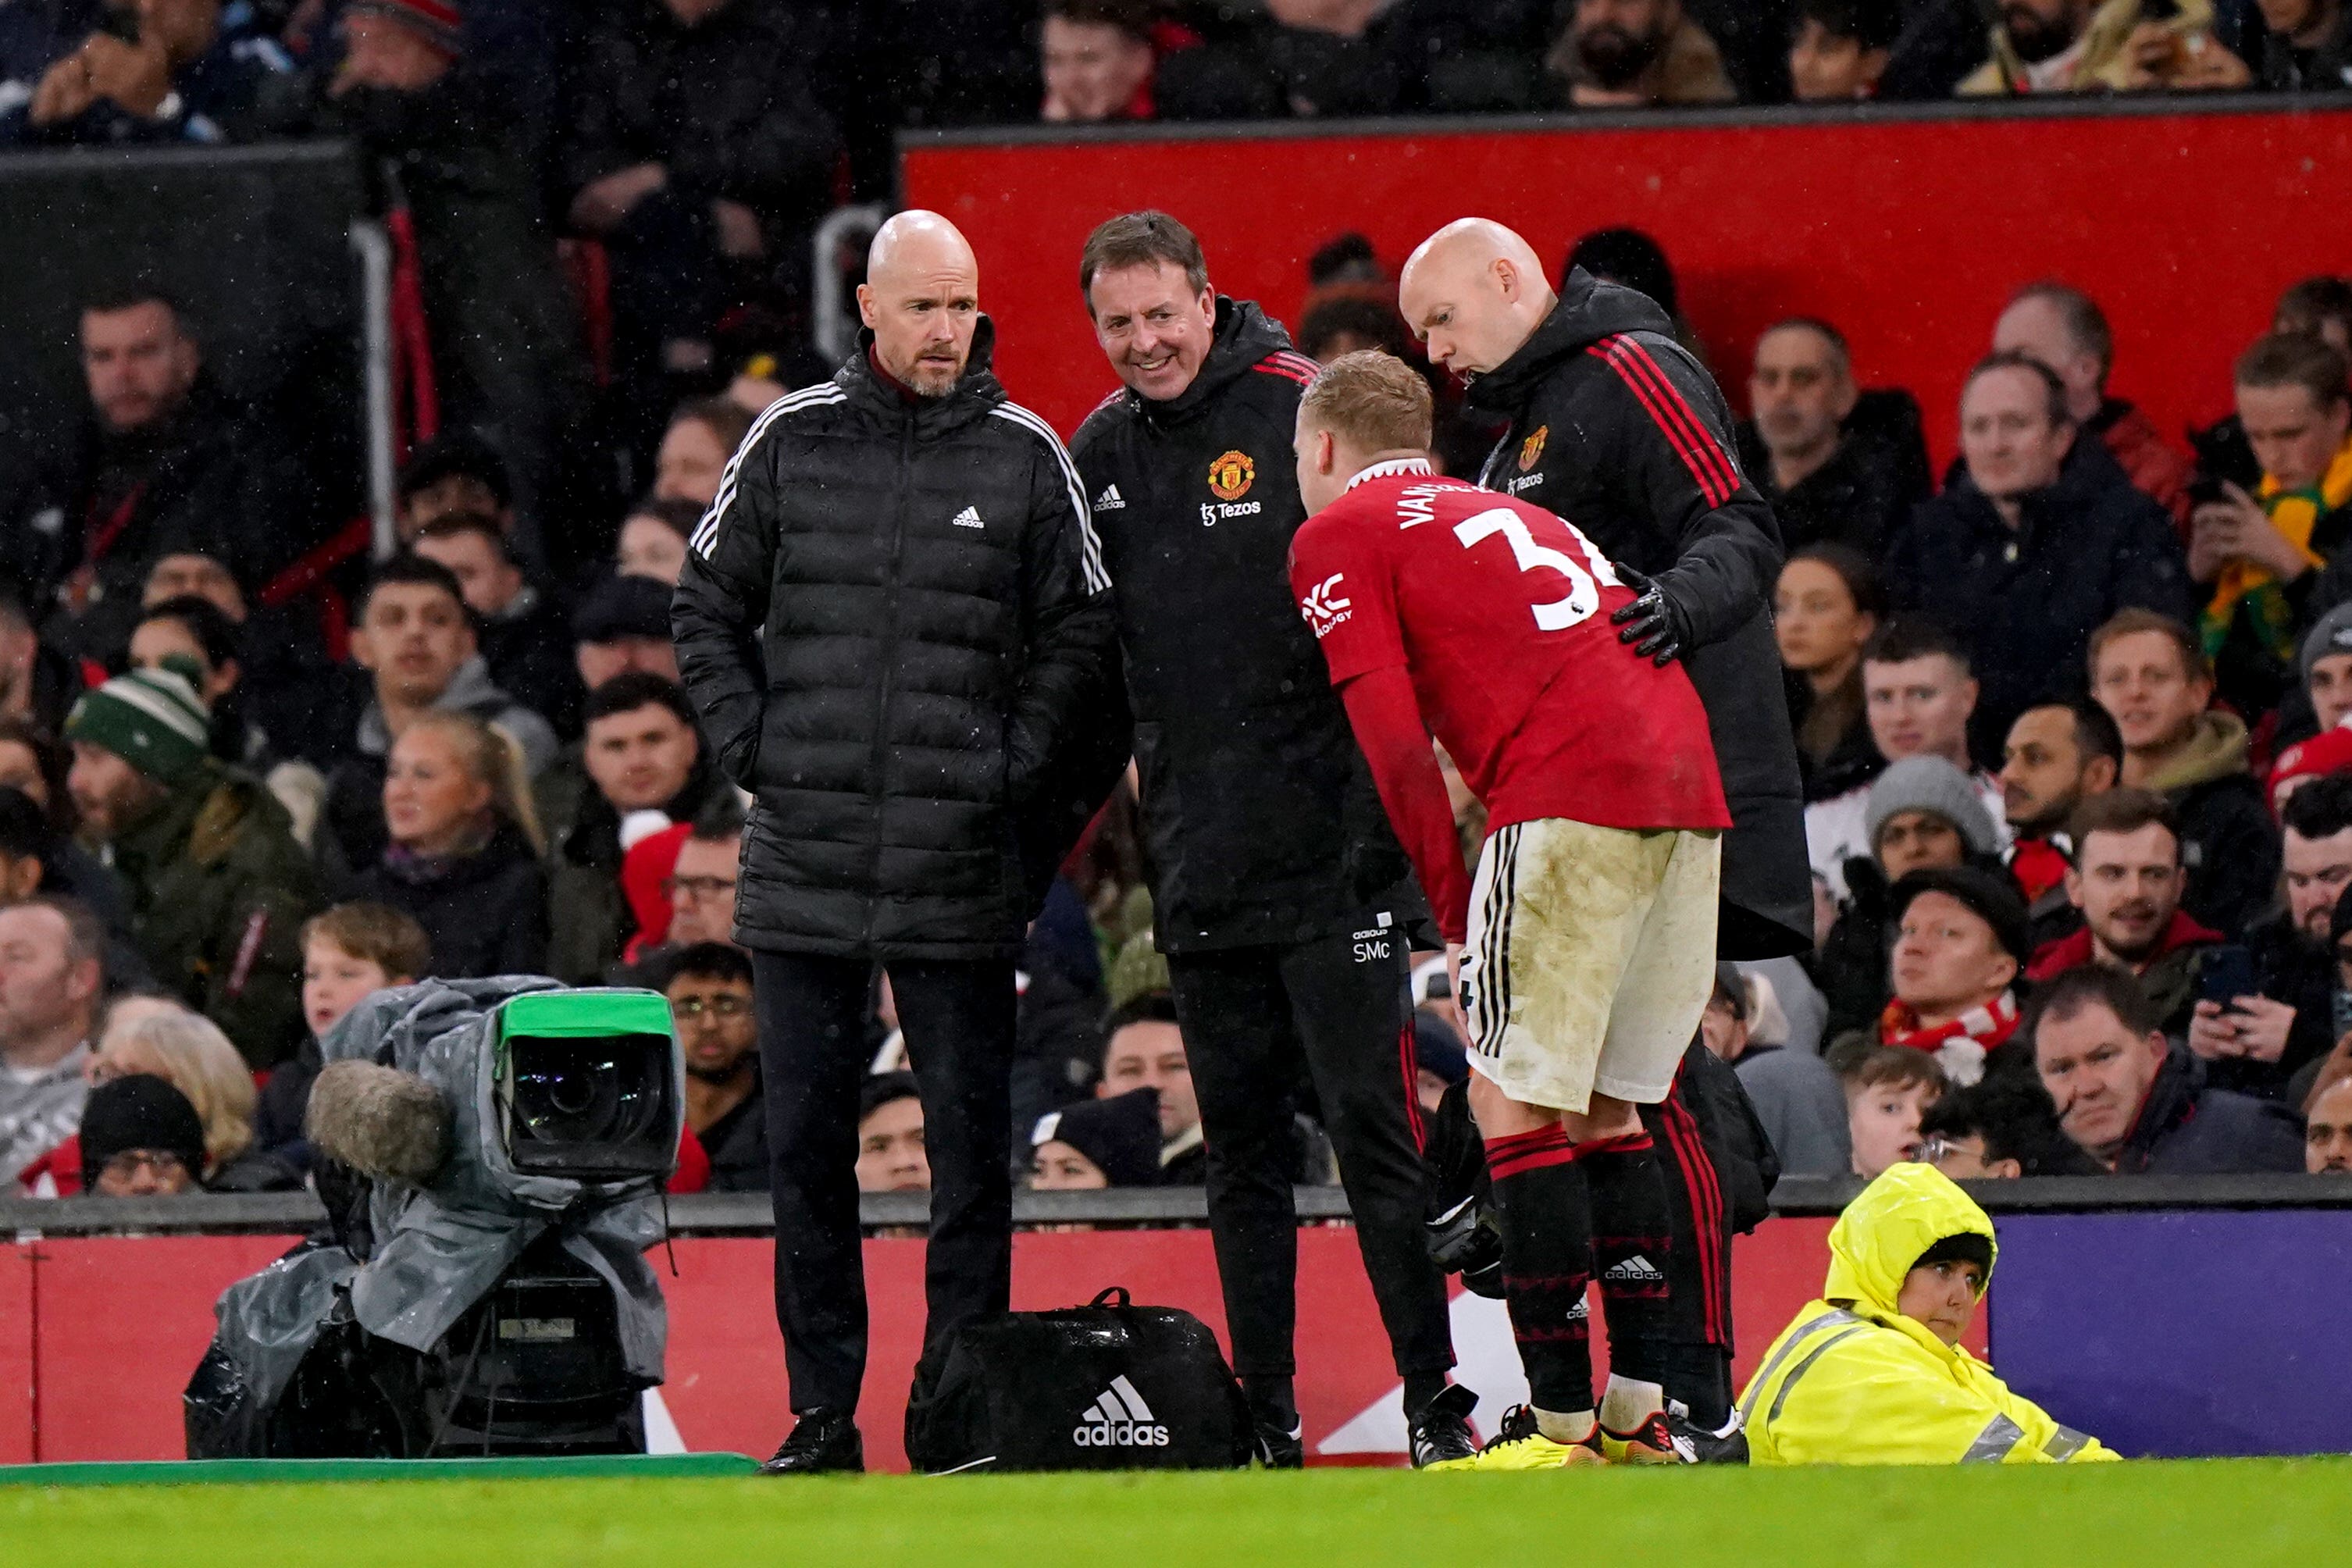 Donny van de Beek speaks to Erik ten Hag after being forced off through injury in Tuesday’s match against Bournemouth (Tim Goode/PA)